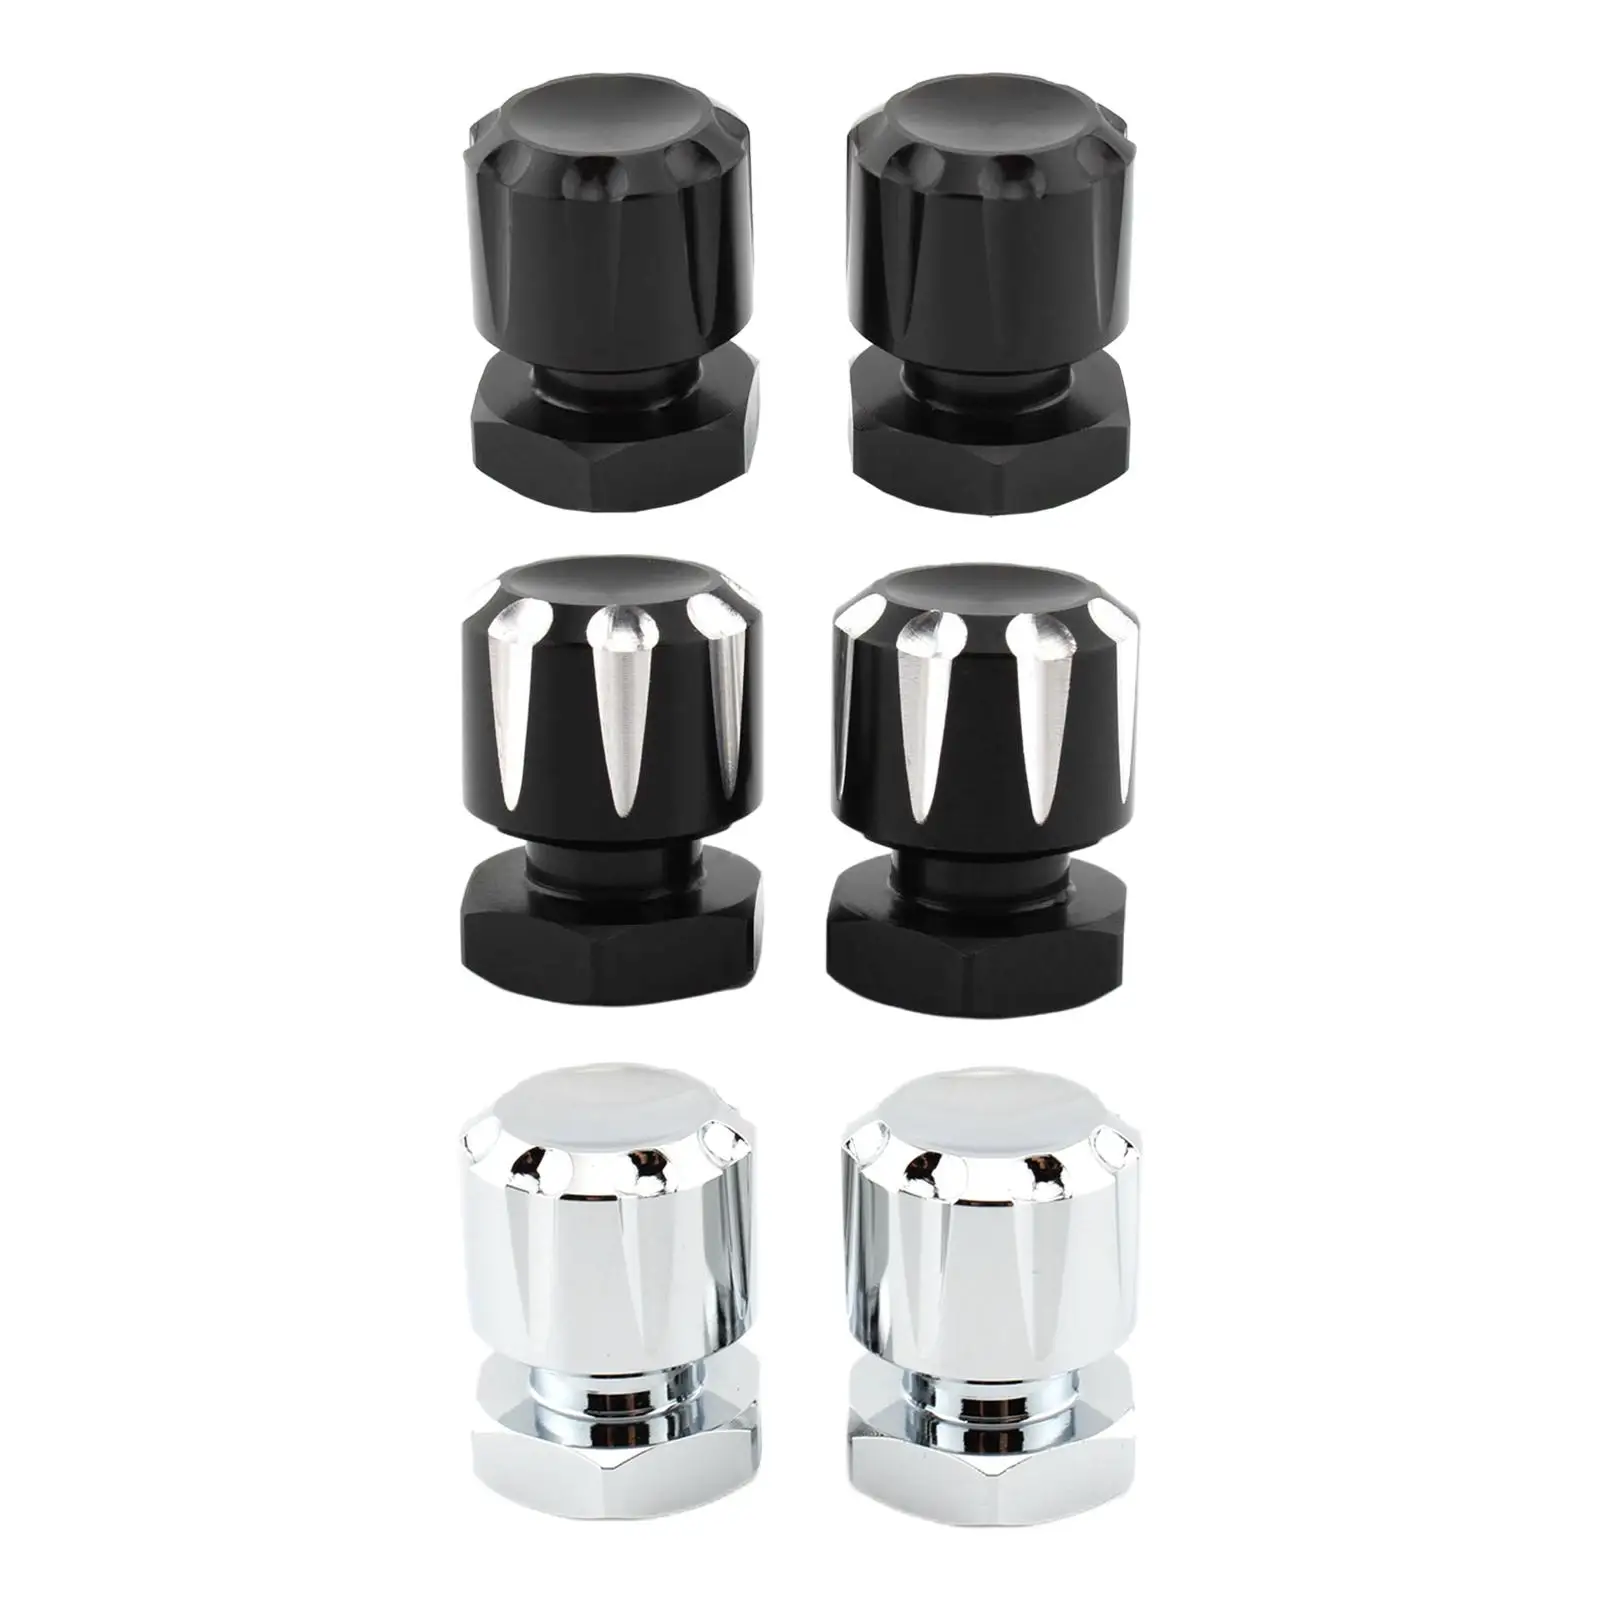 Solo Mounting Nuts Bolts Direct Replaces Spare Parts 78032 Seat Mounting Bolts Solo Mounting Nuts for Breakout 114 Fxbrs